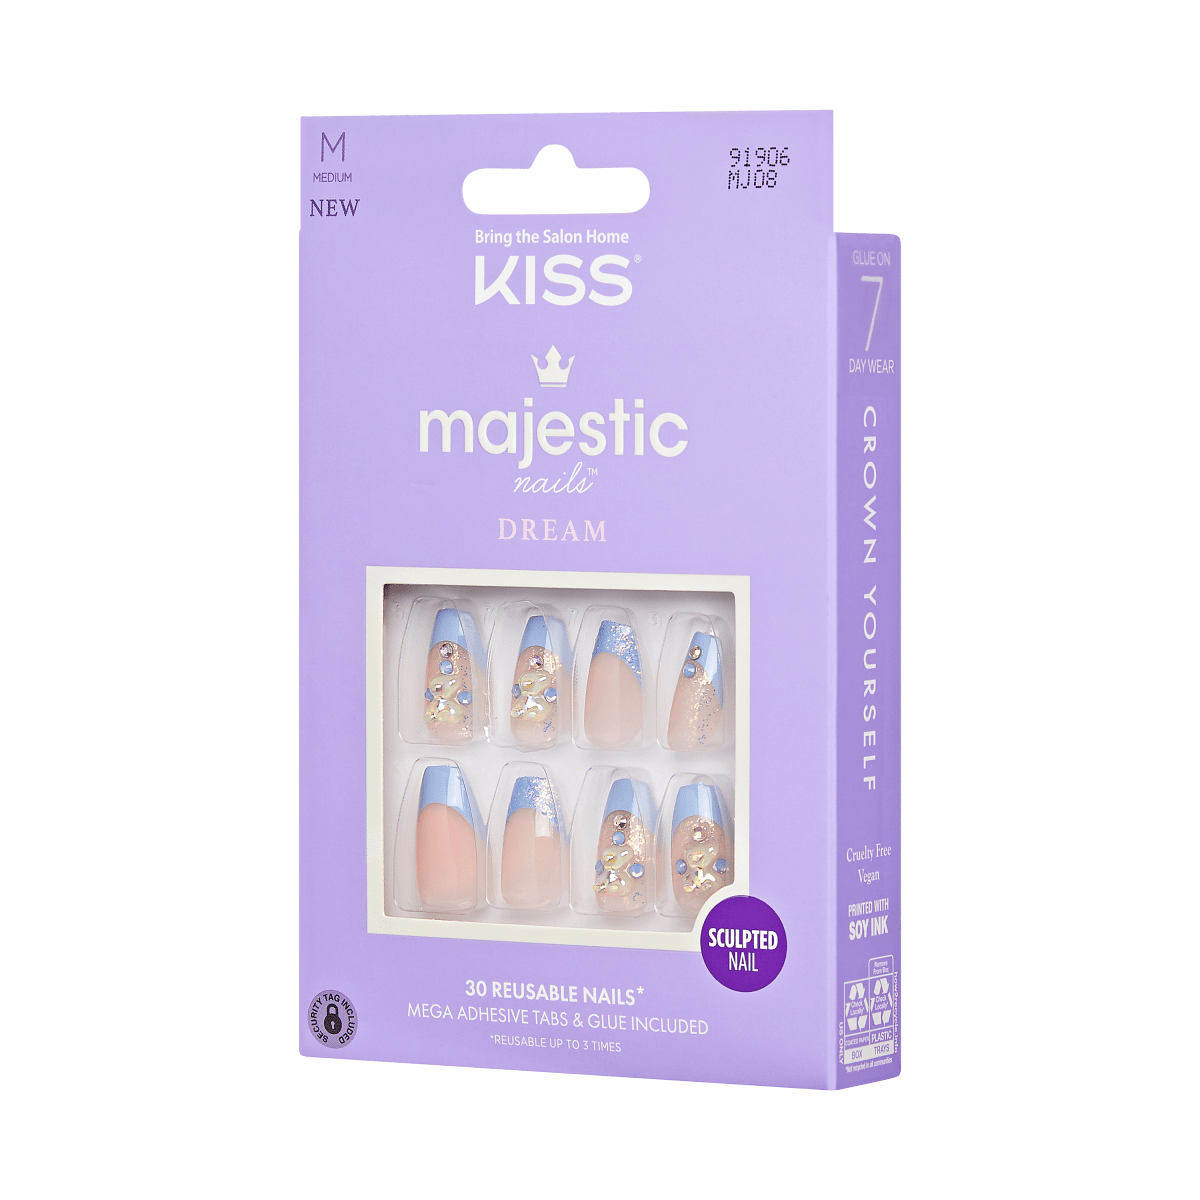 Kiss Majestic Nails - The Queen (MJ08)